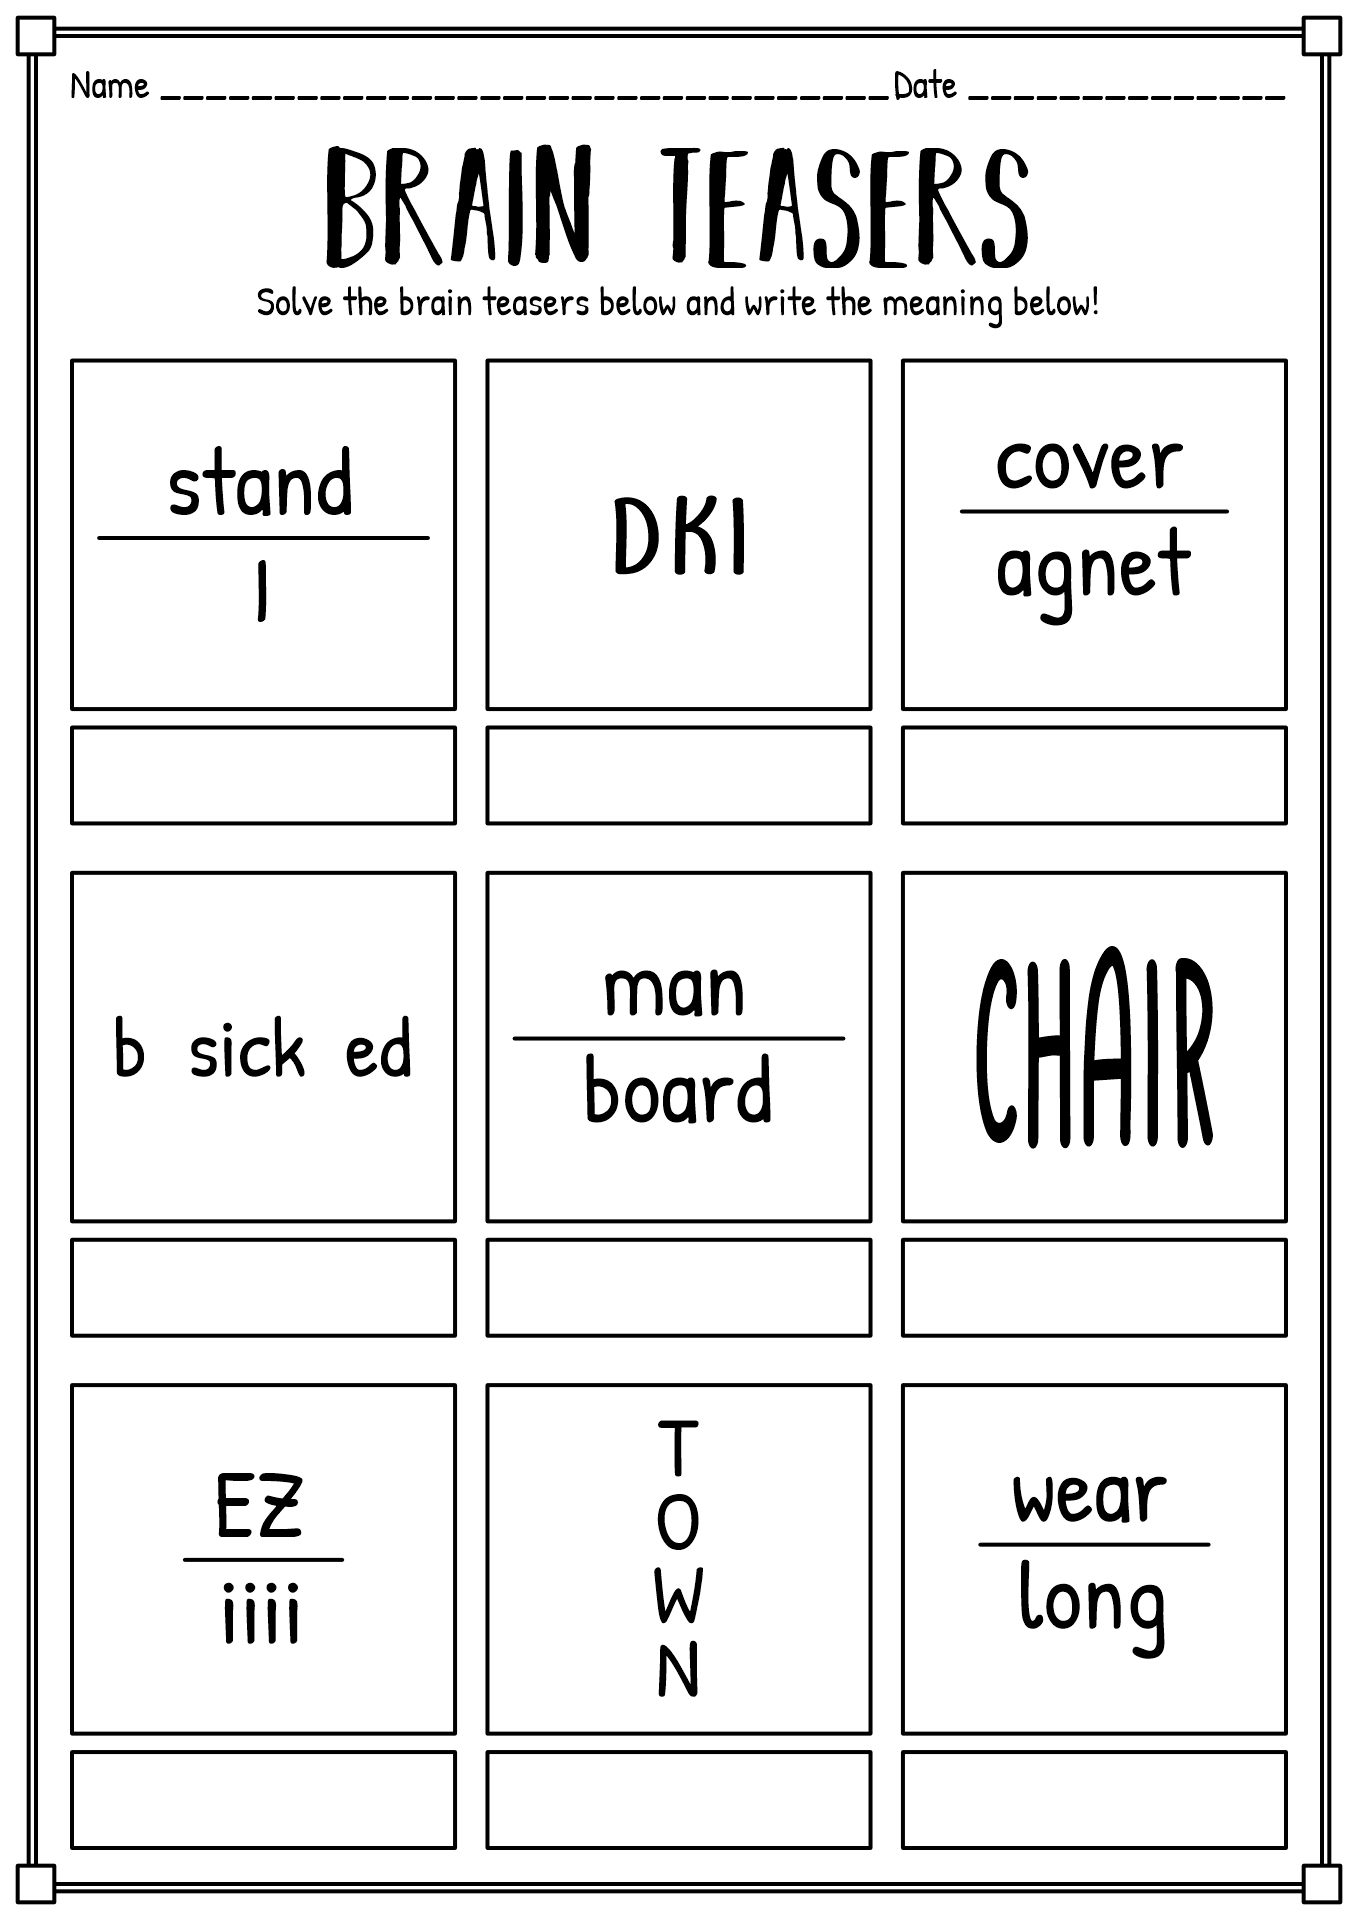 12 Best Images of Riddles And Brain Teasers Worksheets - Printable ...